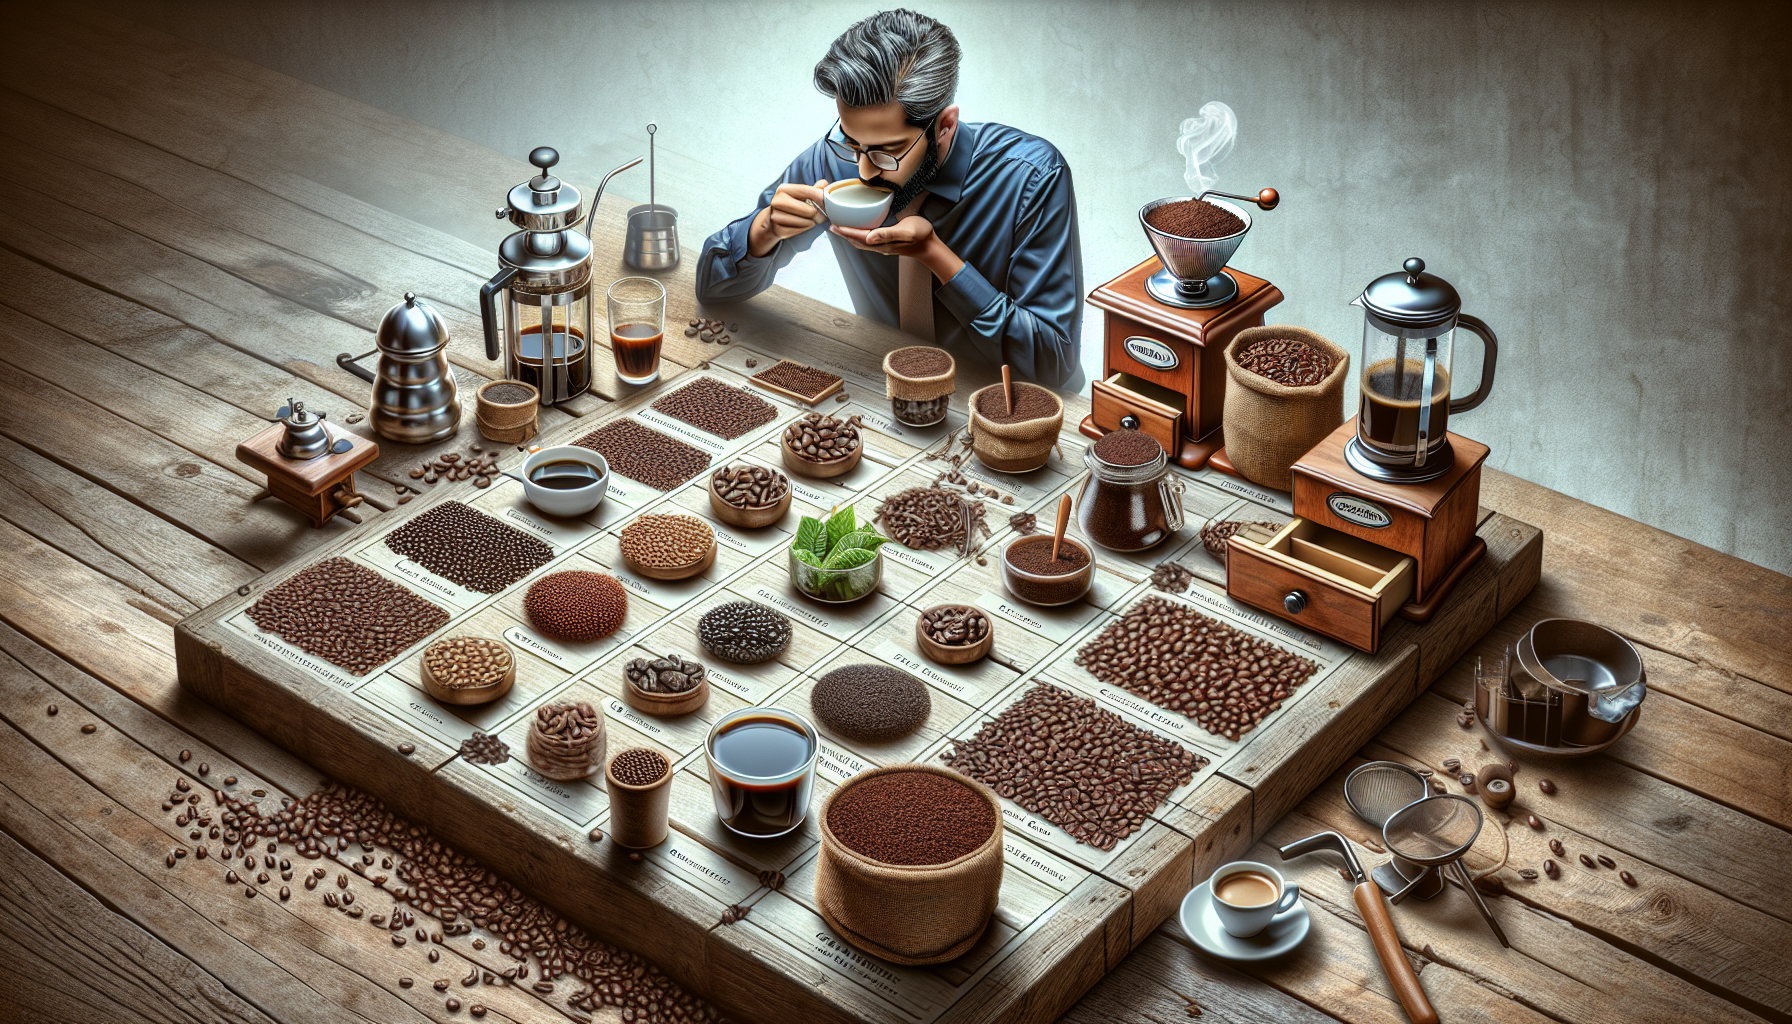 Visualize a detailed image showcasing the top coffee bean picks as per a brew-lover's review. The scene includes a rustic wooden table with various types of coffee beans arranged in distinct sections.